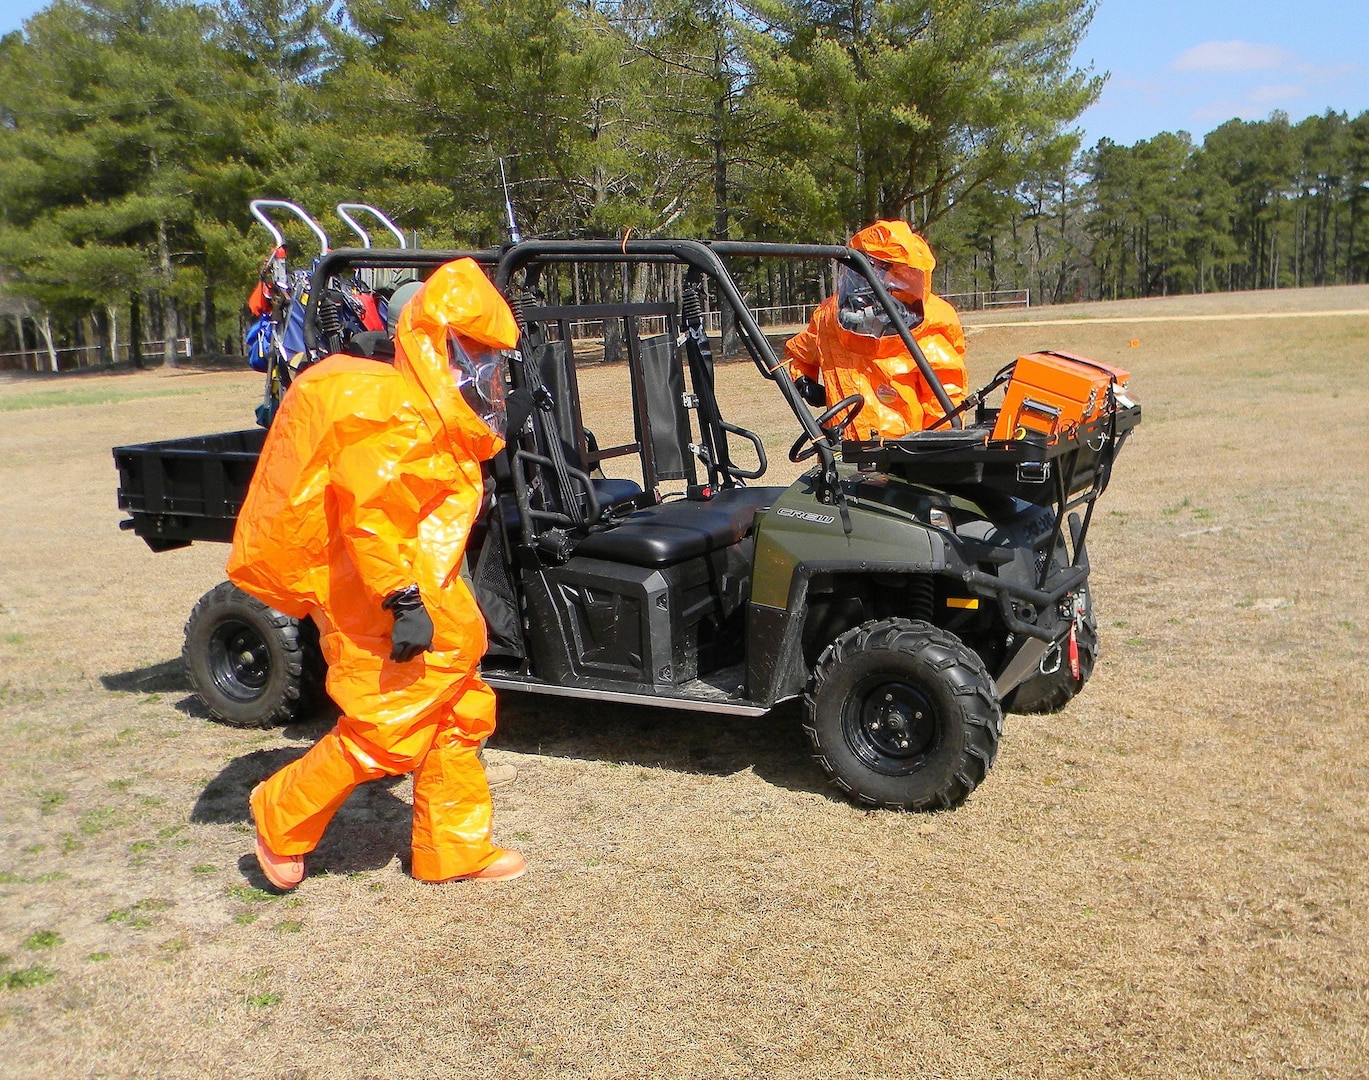 Two members of the North Carolina National Guard's 42nd Civil Support Team's survey section prepare for transport on a Polaris quad track vehicle to a simulated Chemical, Biological, Radiological, Nuclear and of Explosive (CBRNE) incident site during the unit's evaluation March 28, 2013.